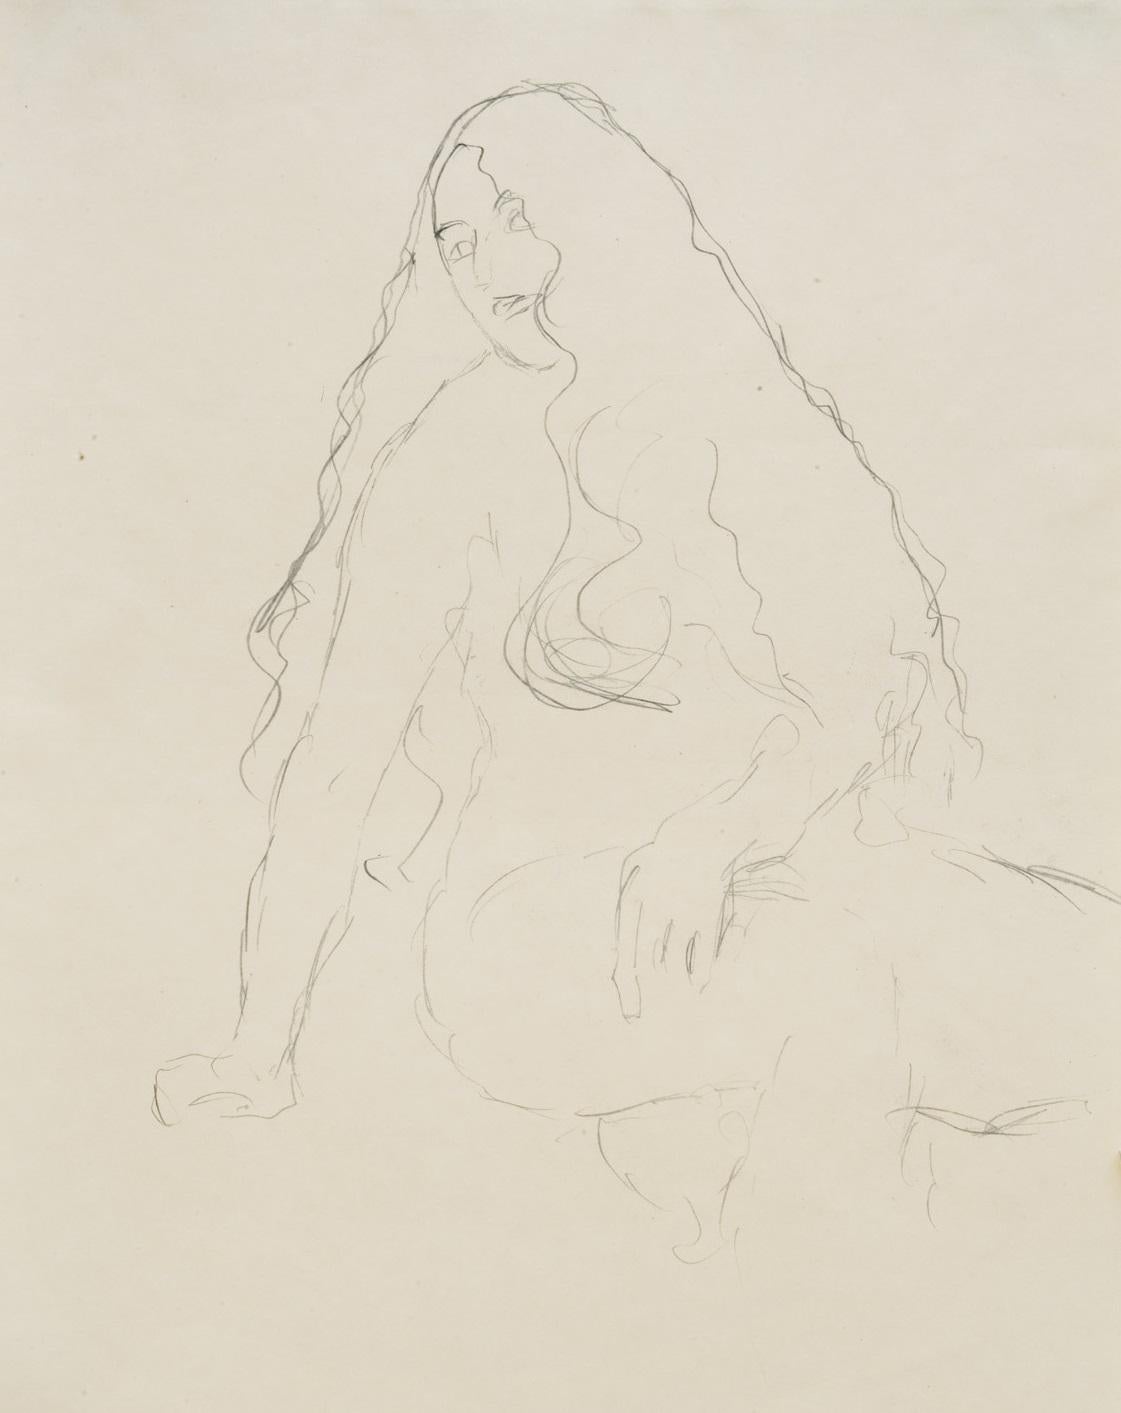 Seated, long-haired Nude, Study for "Adam and Eve" - Art by Gustav Klimt